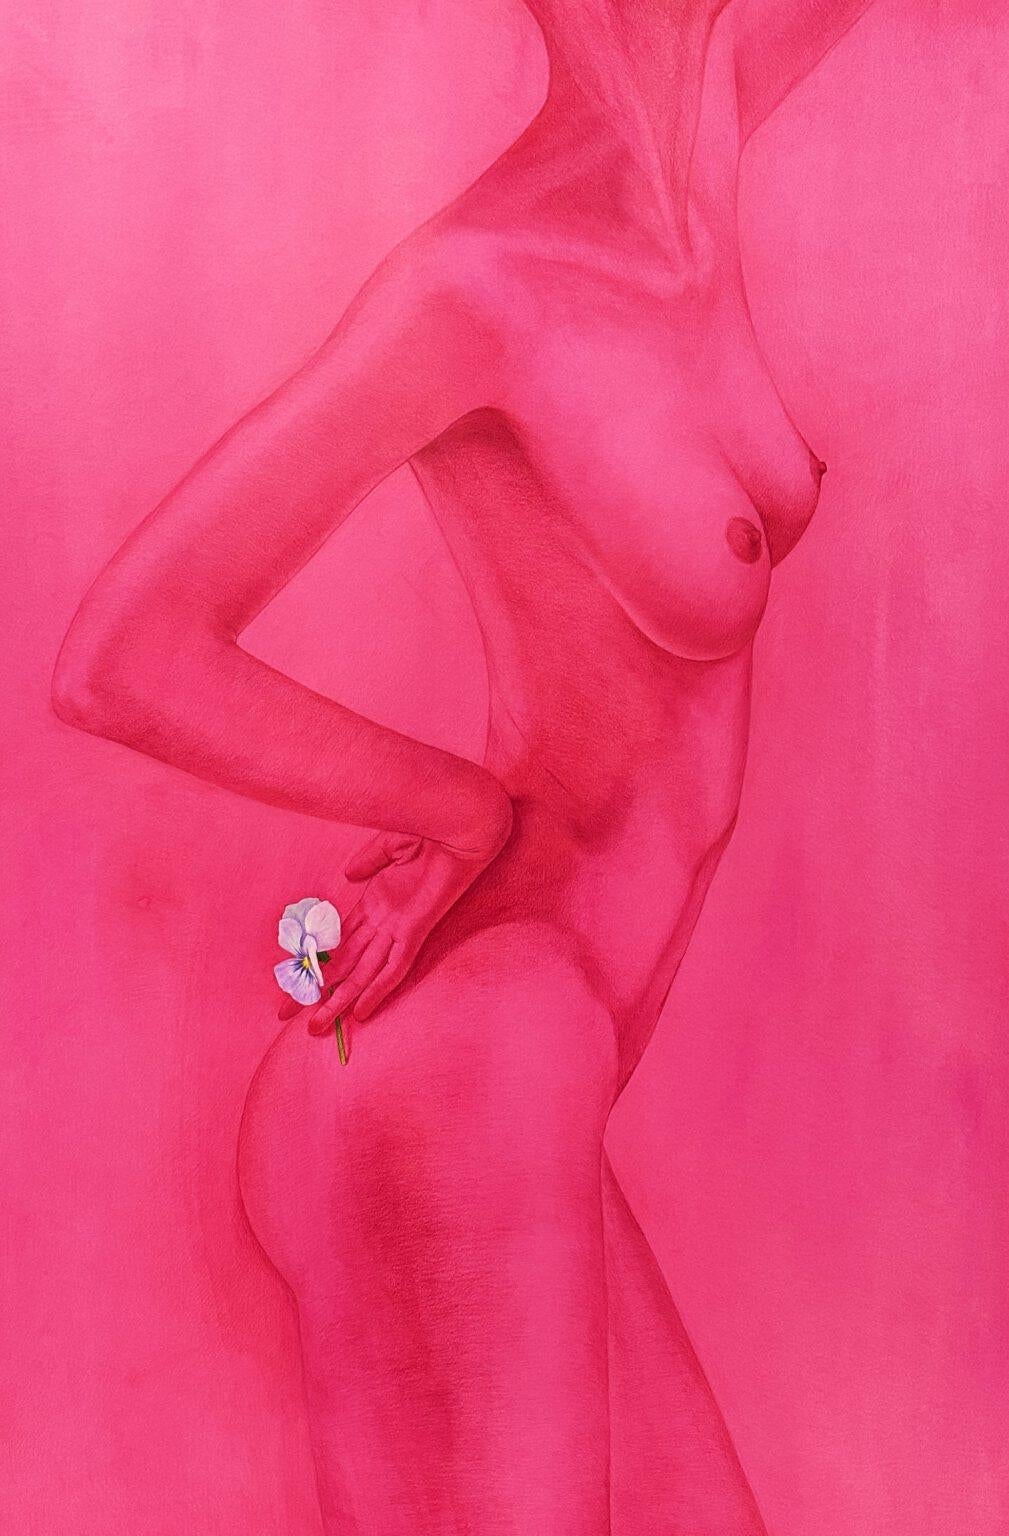 positive sexual objectification, pencil, watercolor, paper, 90х60cm - Art by Elena Brauschenberg